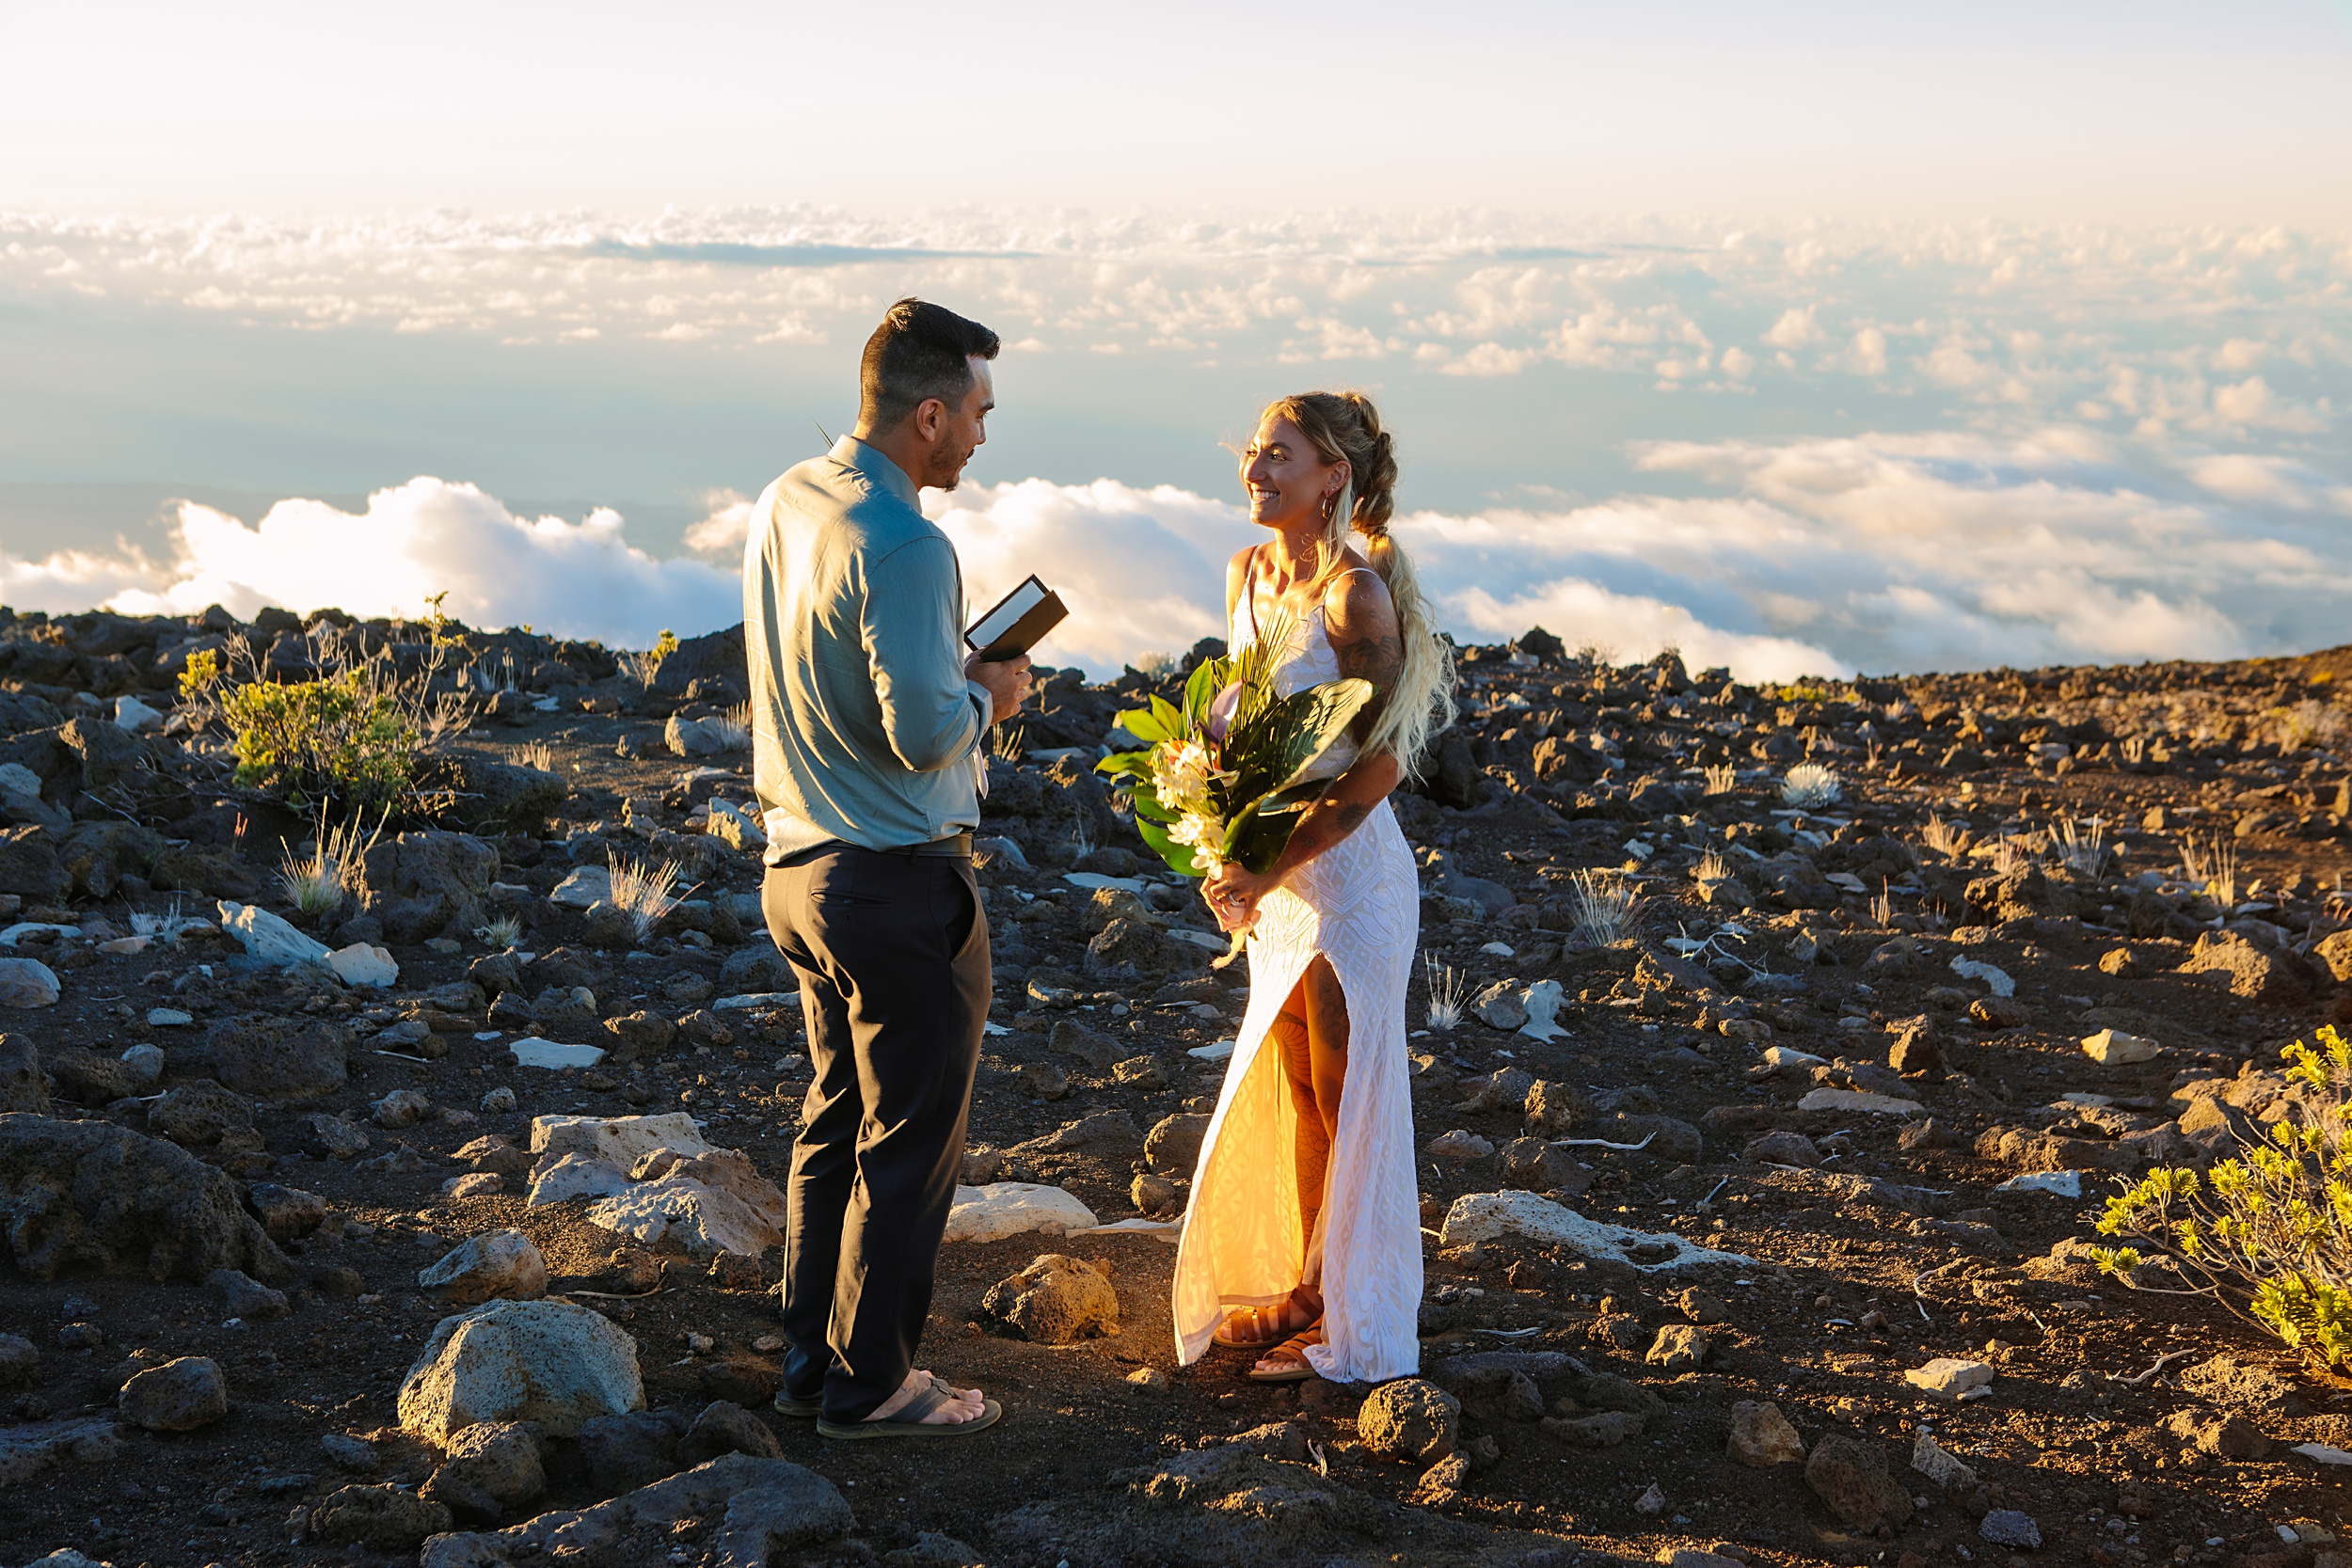 Talitha-and-Ted-54 How to Elope to Hawaii | Your Complete Elopement Guide to Oahu, Maui, Kauai, and the Big Island.